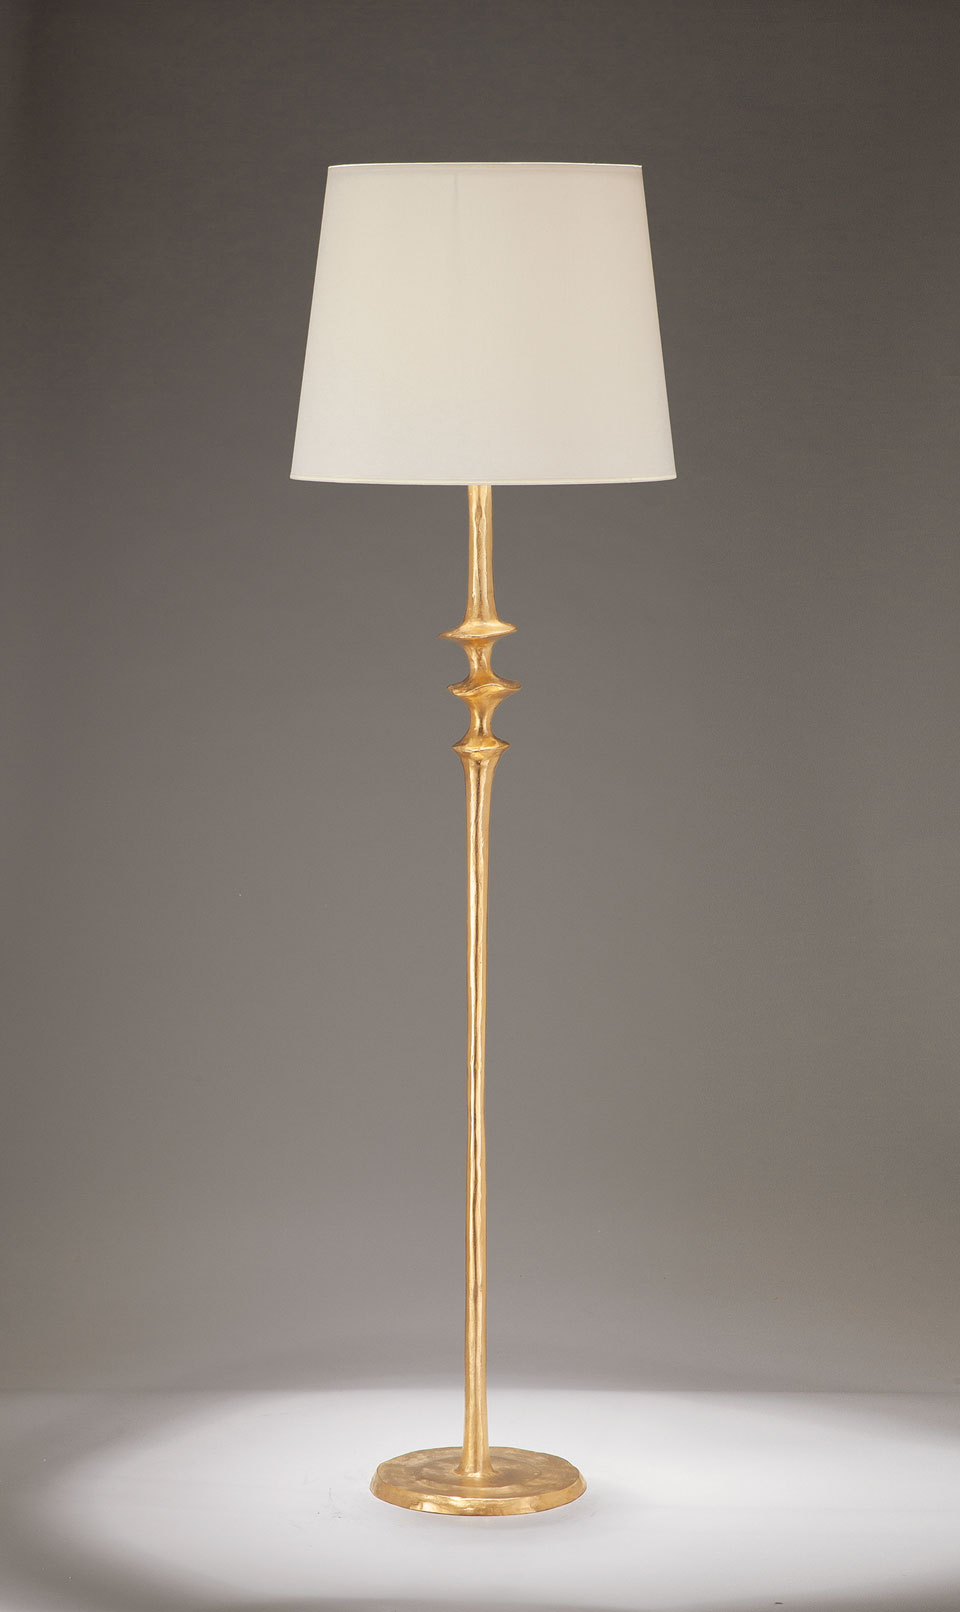 Floor Lamp With Large White Shade Available In Black And Satin Nickel within sizing 960 X 1612